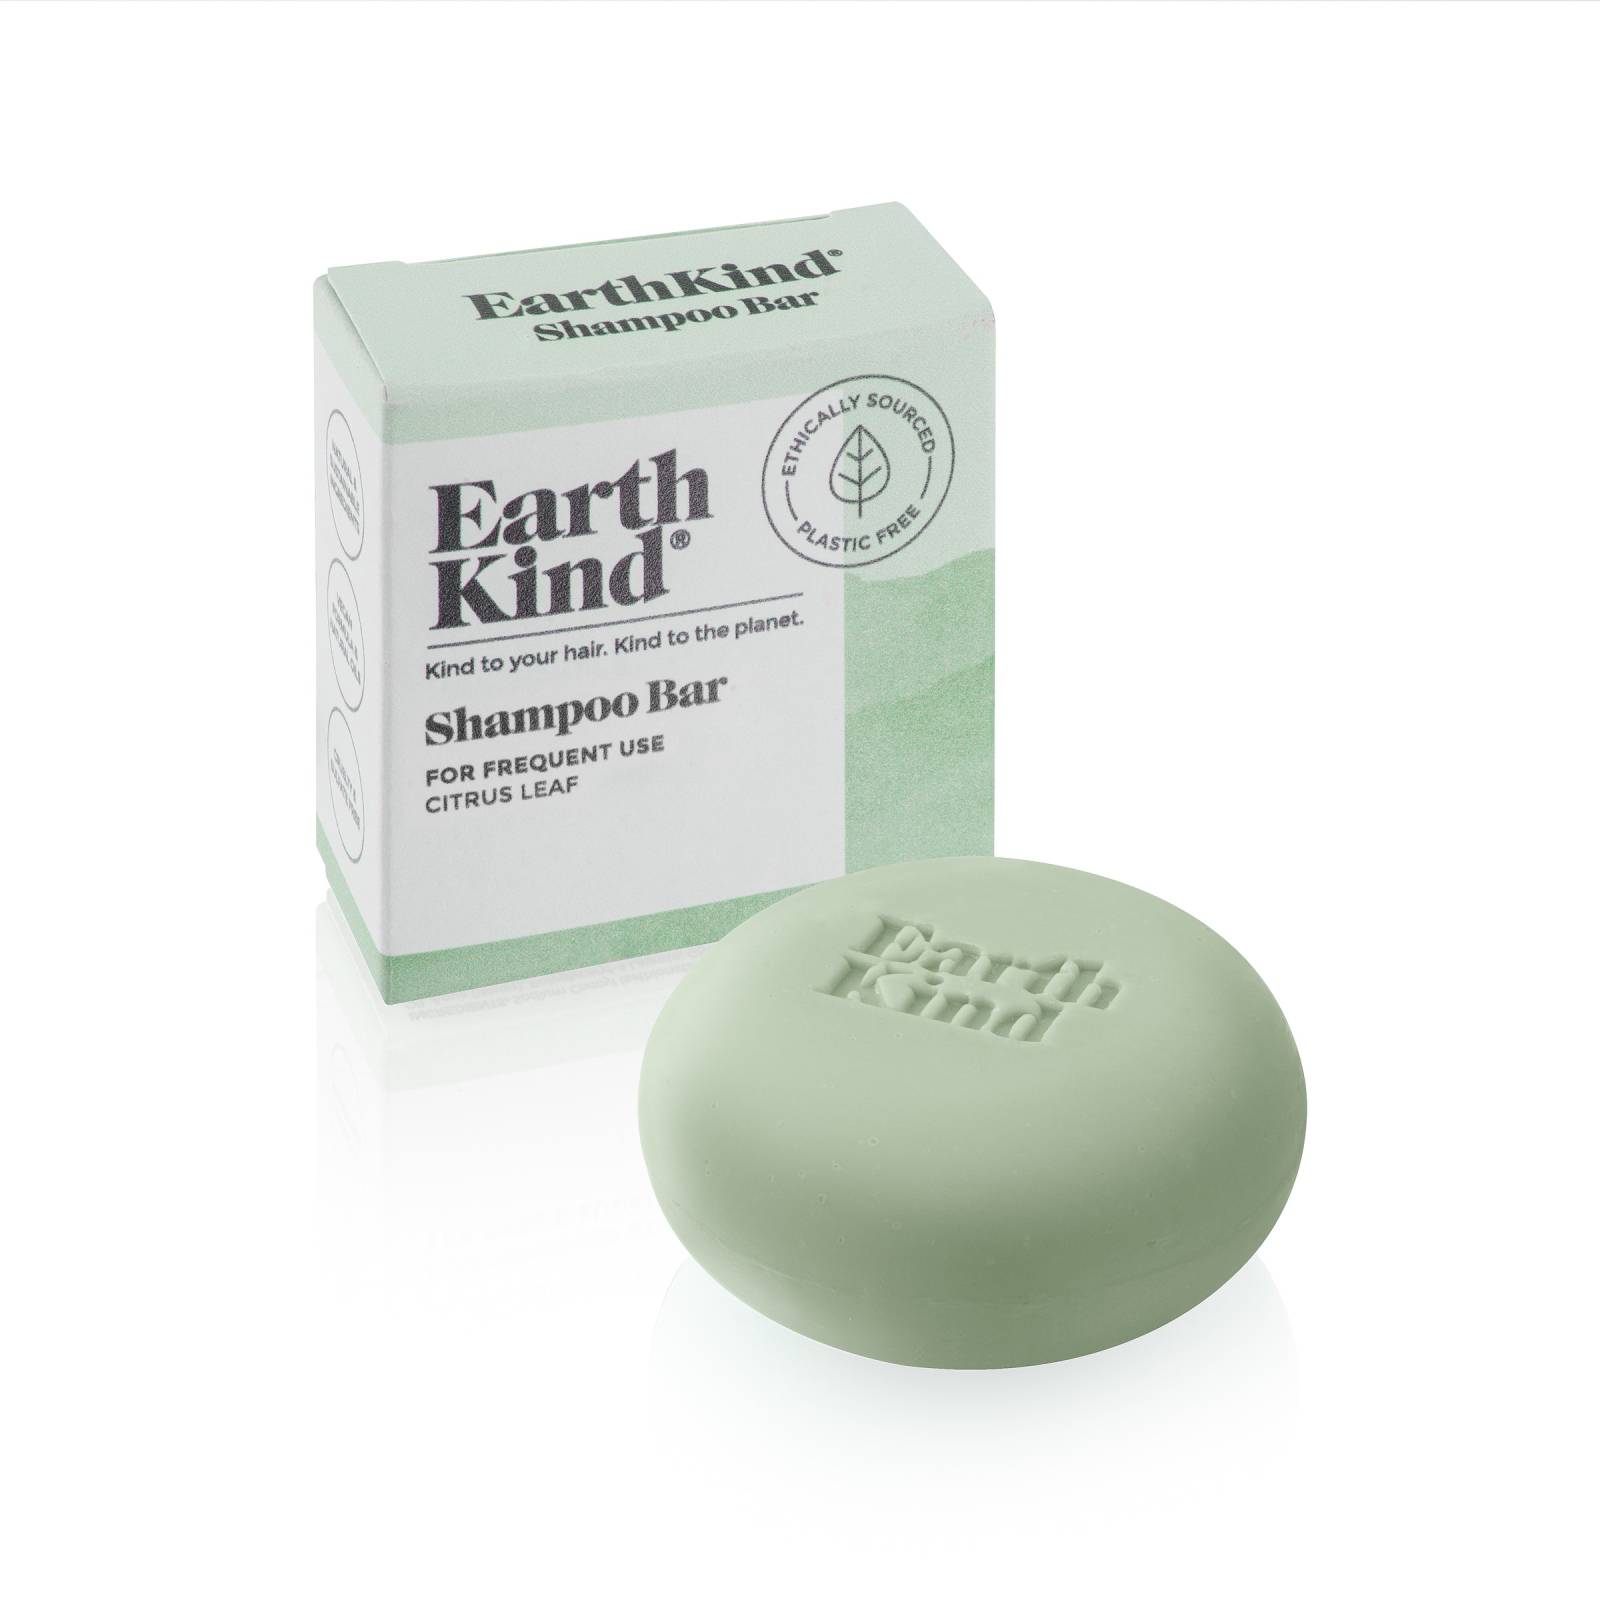 EarthKind Citrus Leaf Shampoo Bar for Frequent Use 50g